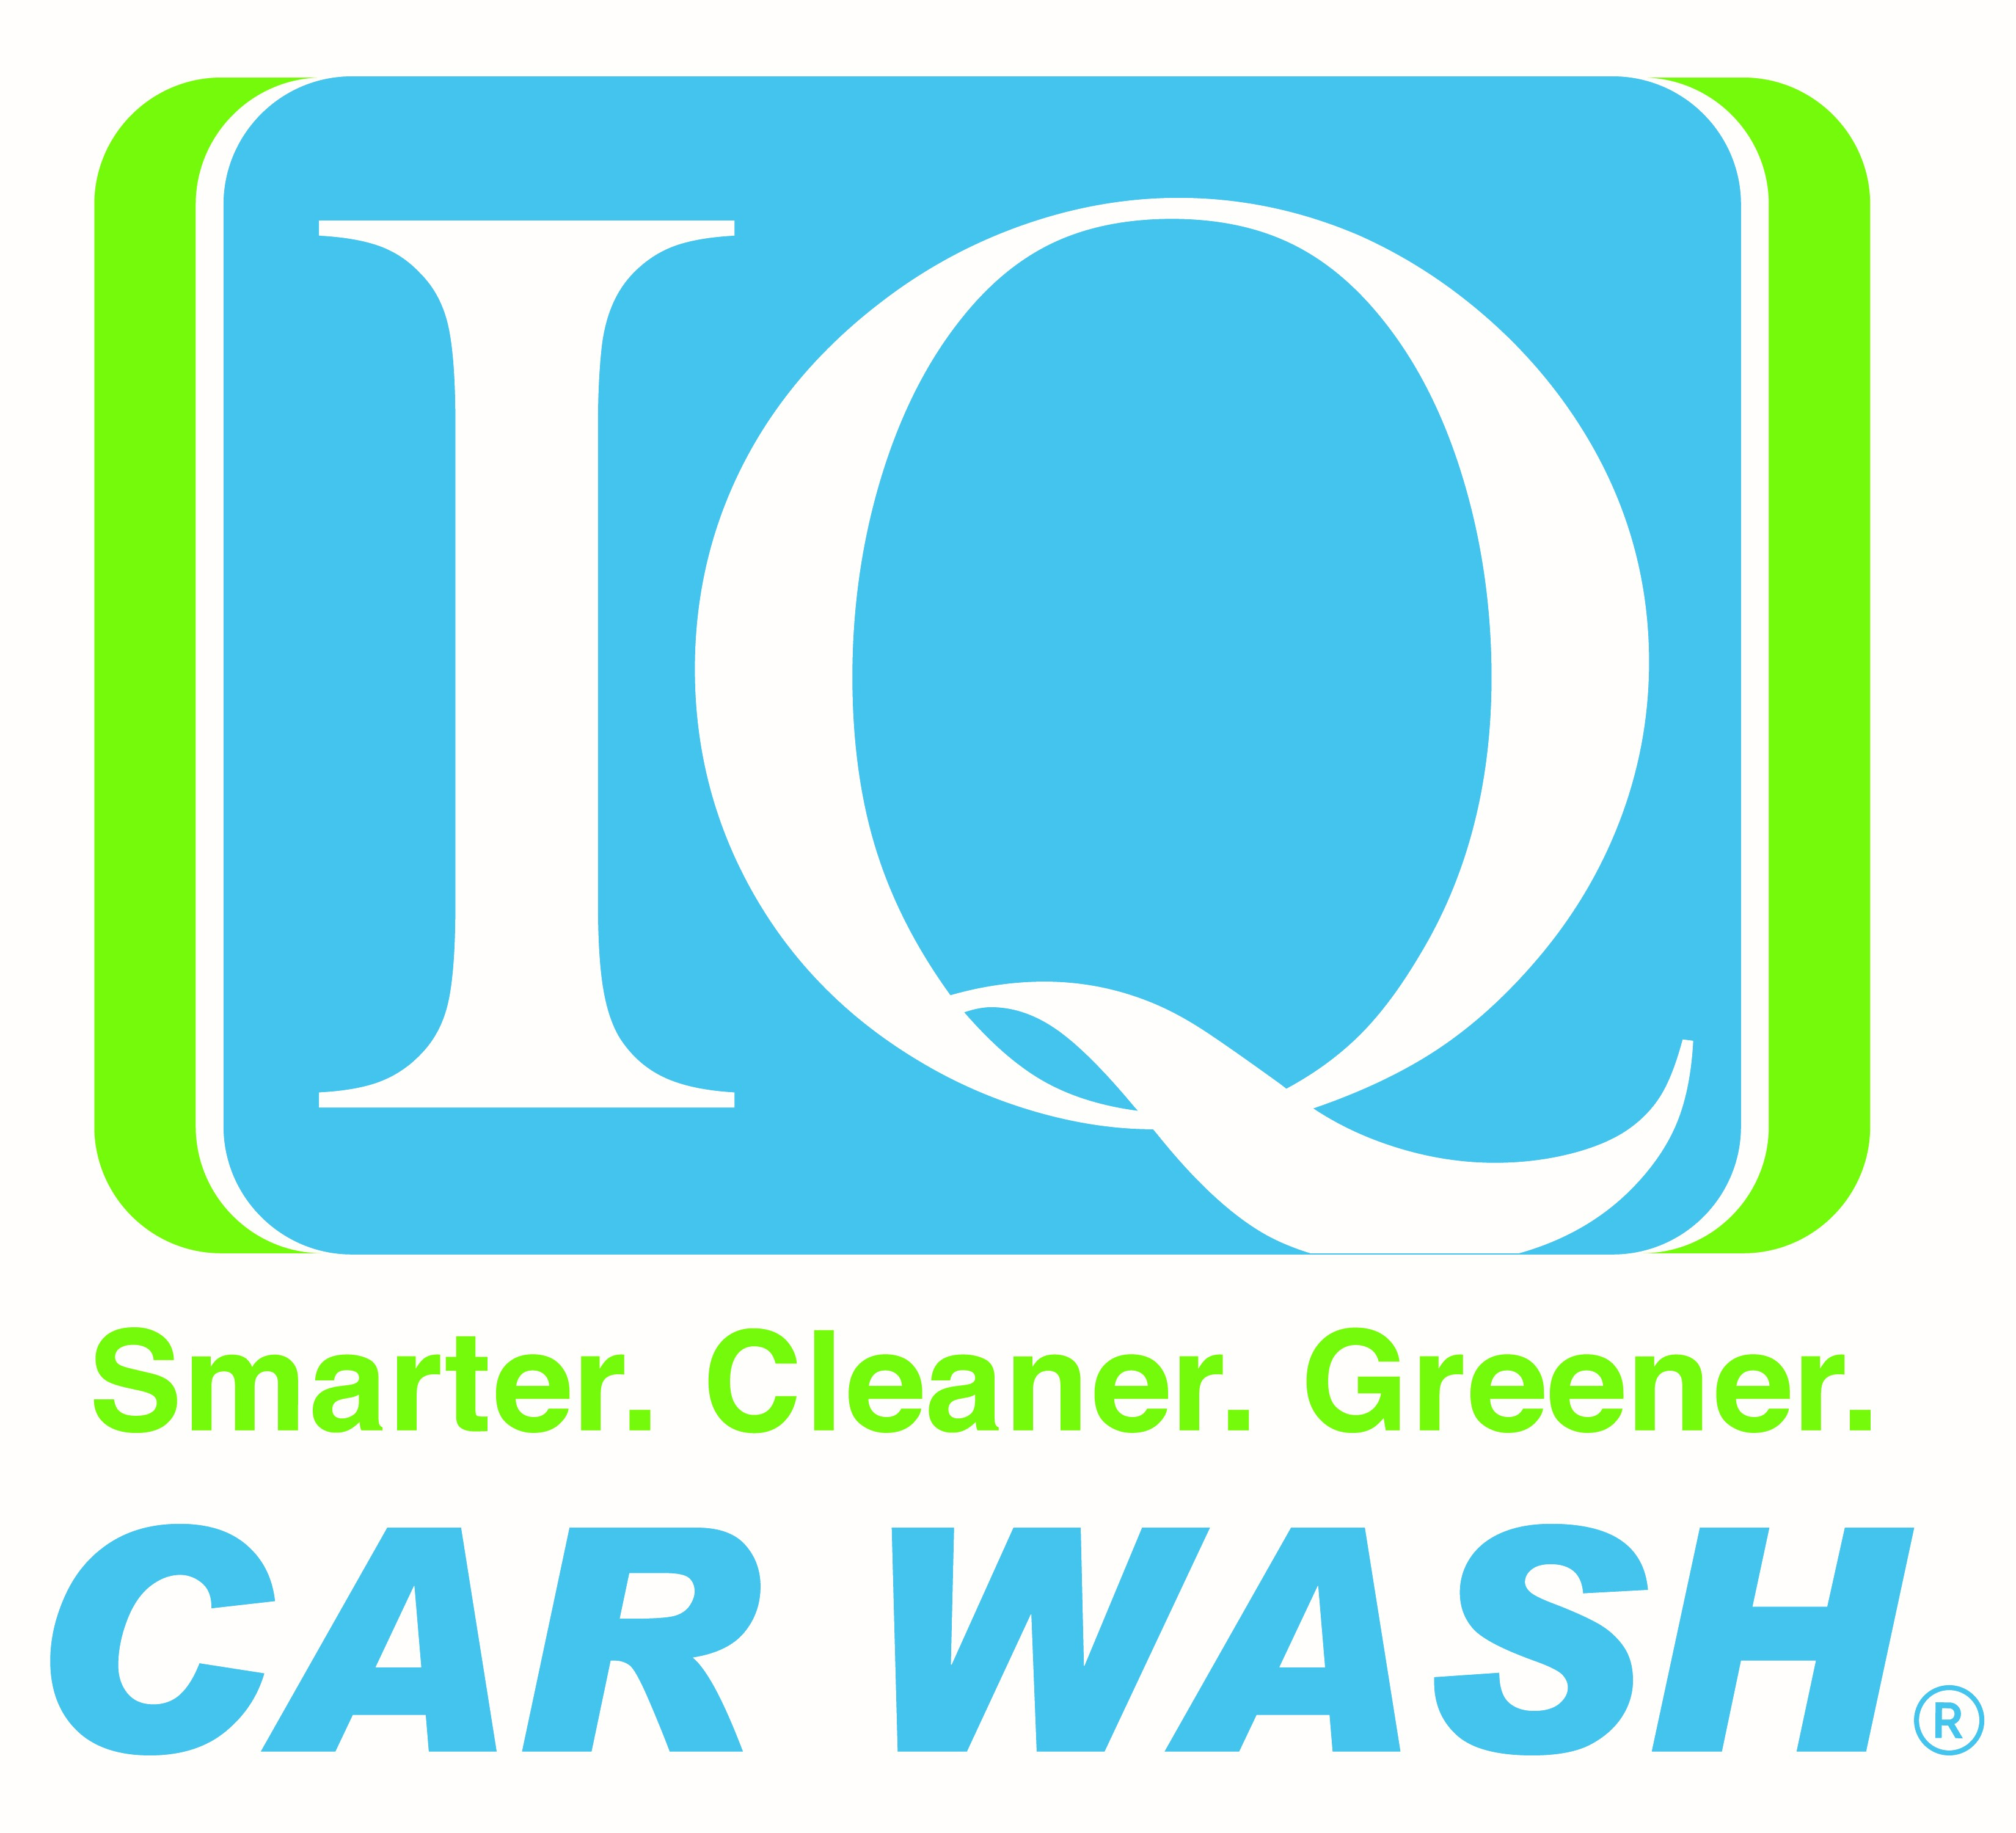 $50 Voucher For IQ Car Wash Omaha for only $25